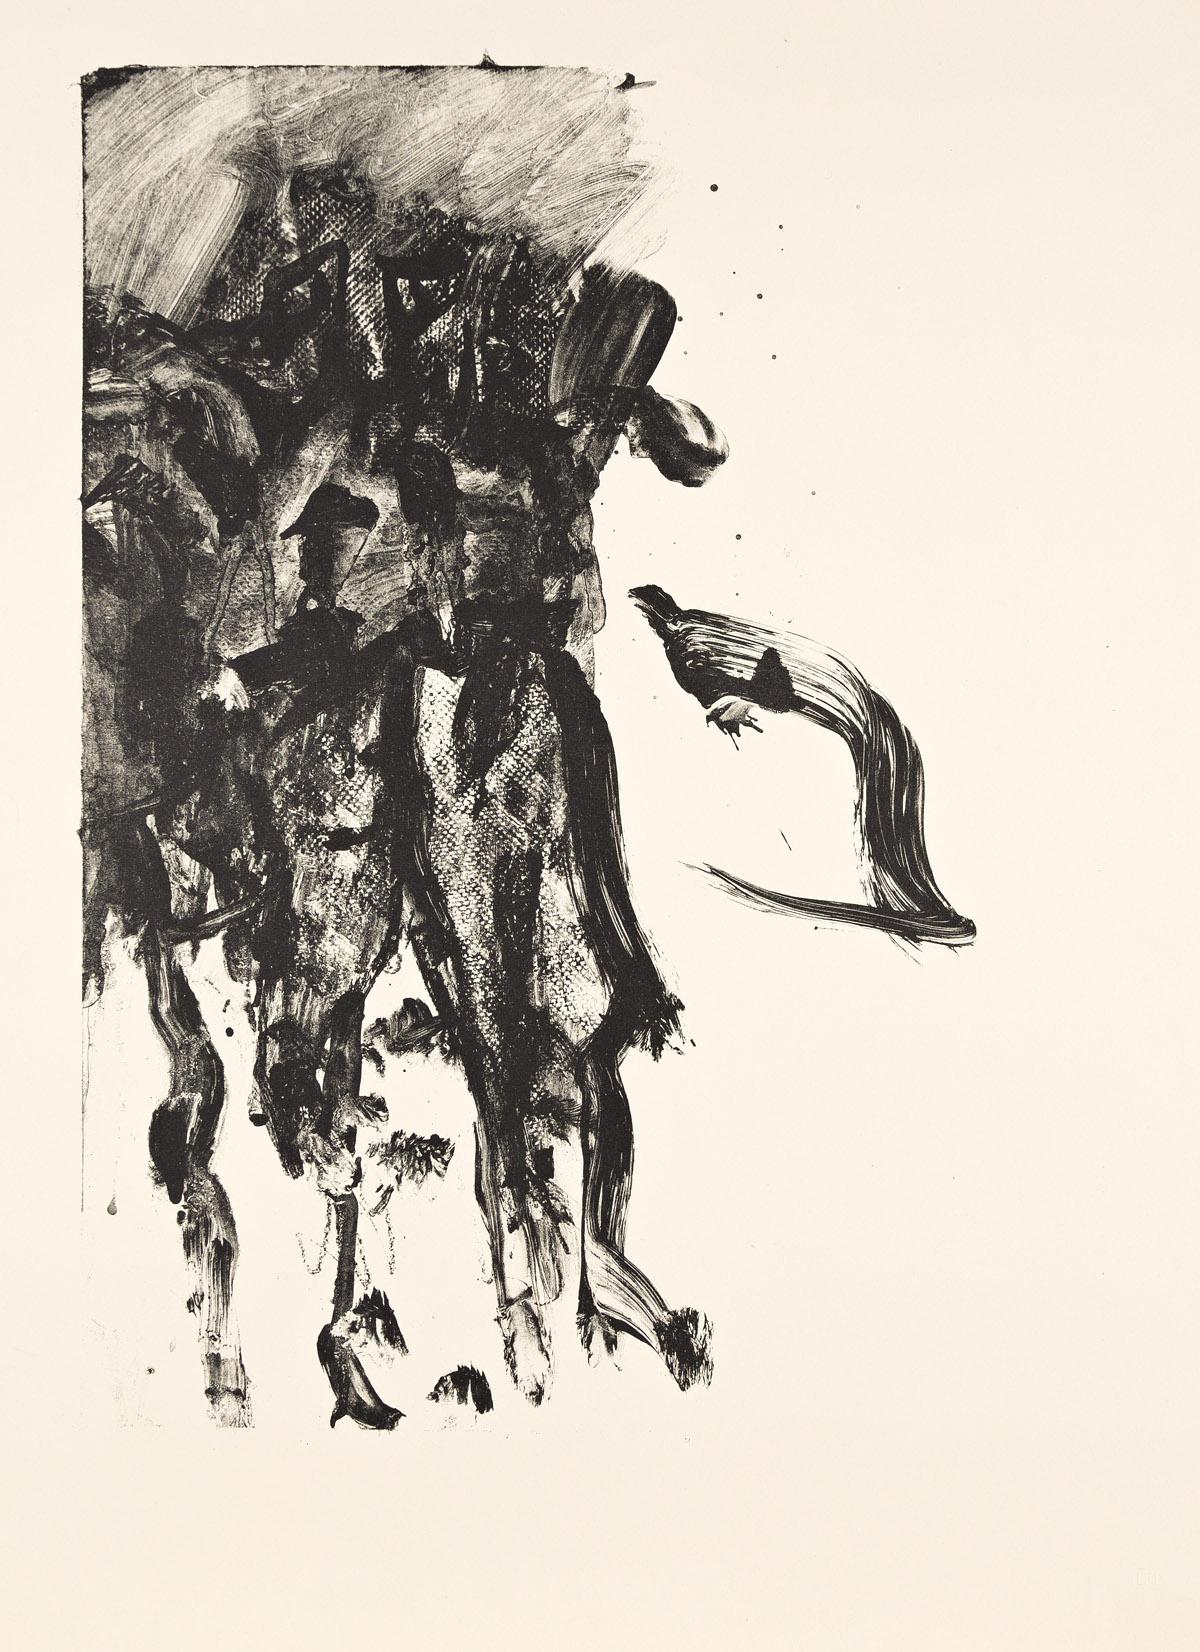 Willem de Kooning Abstract Print - Untitled (Litho #4)